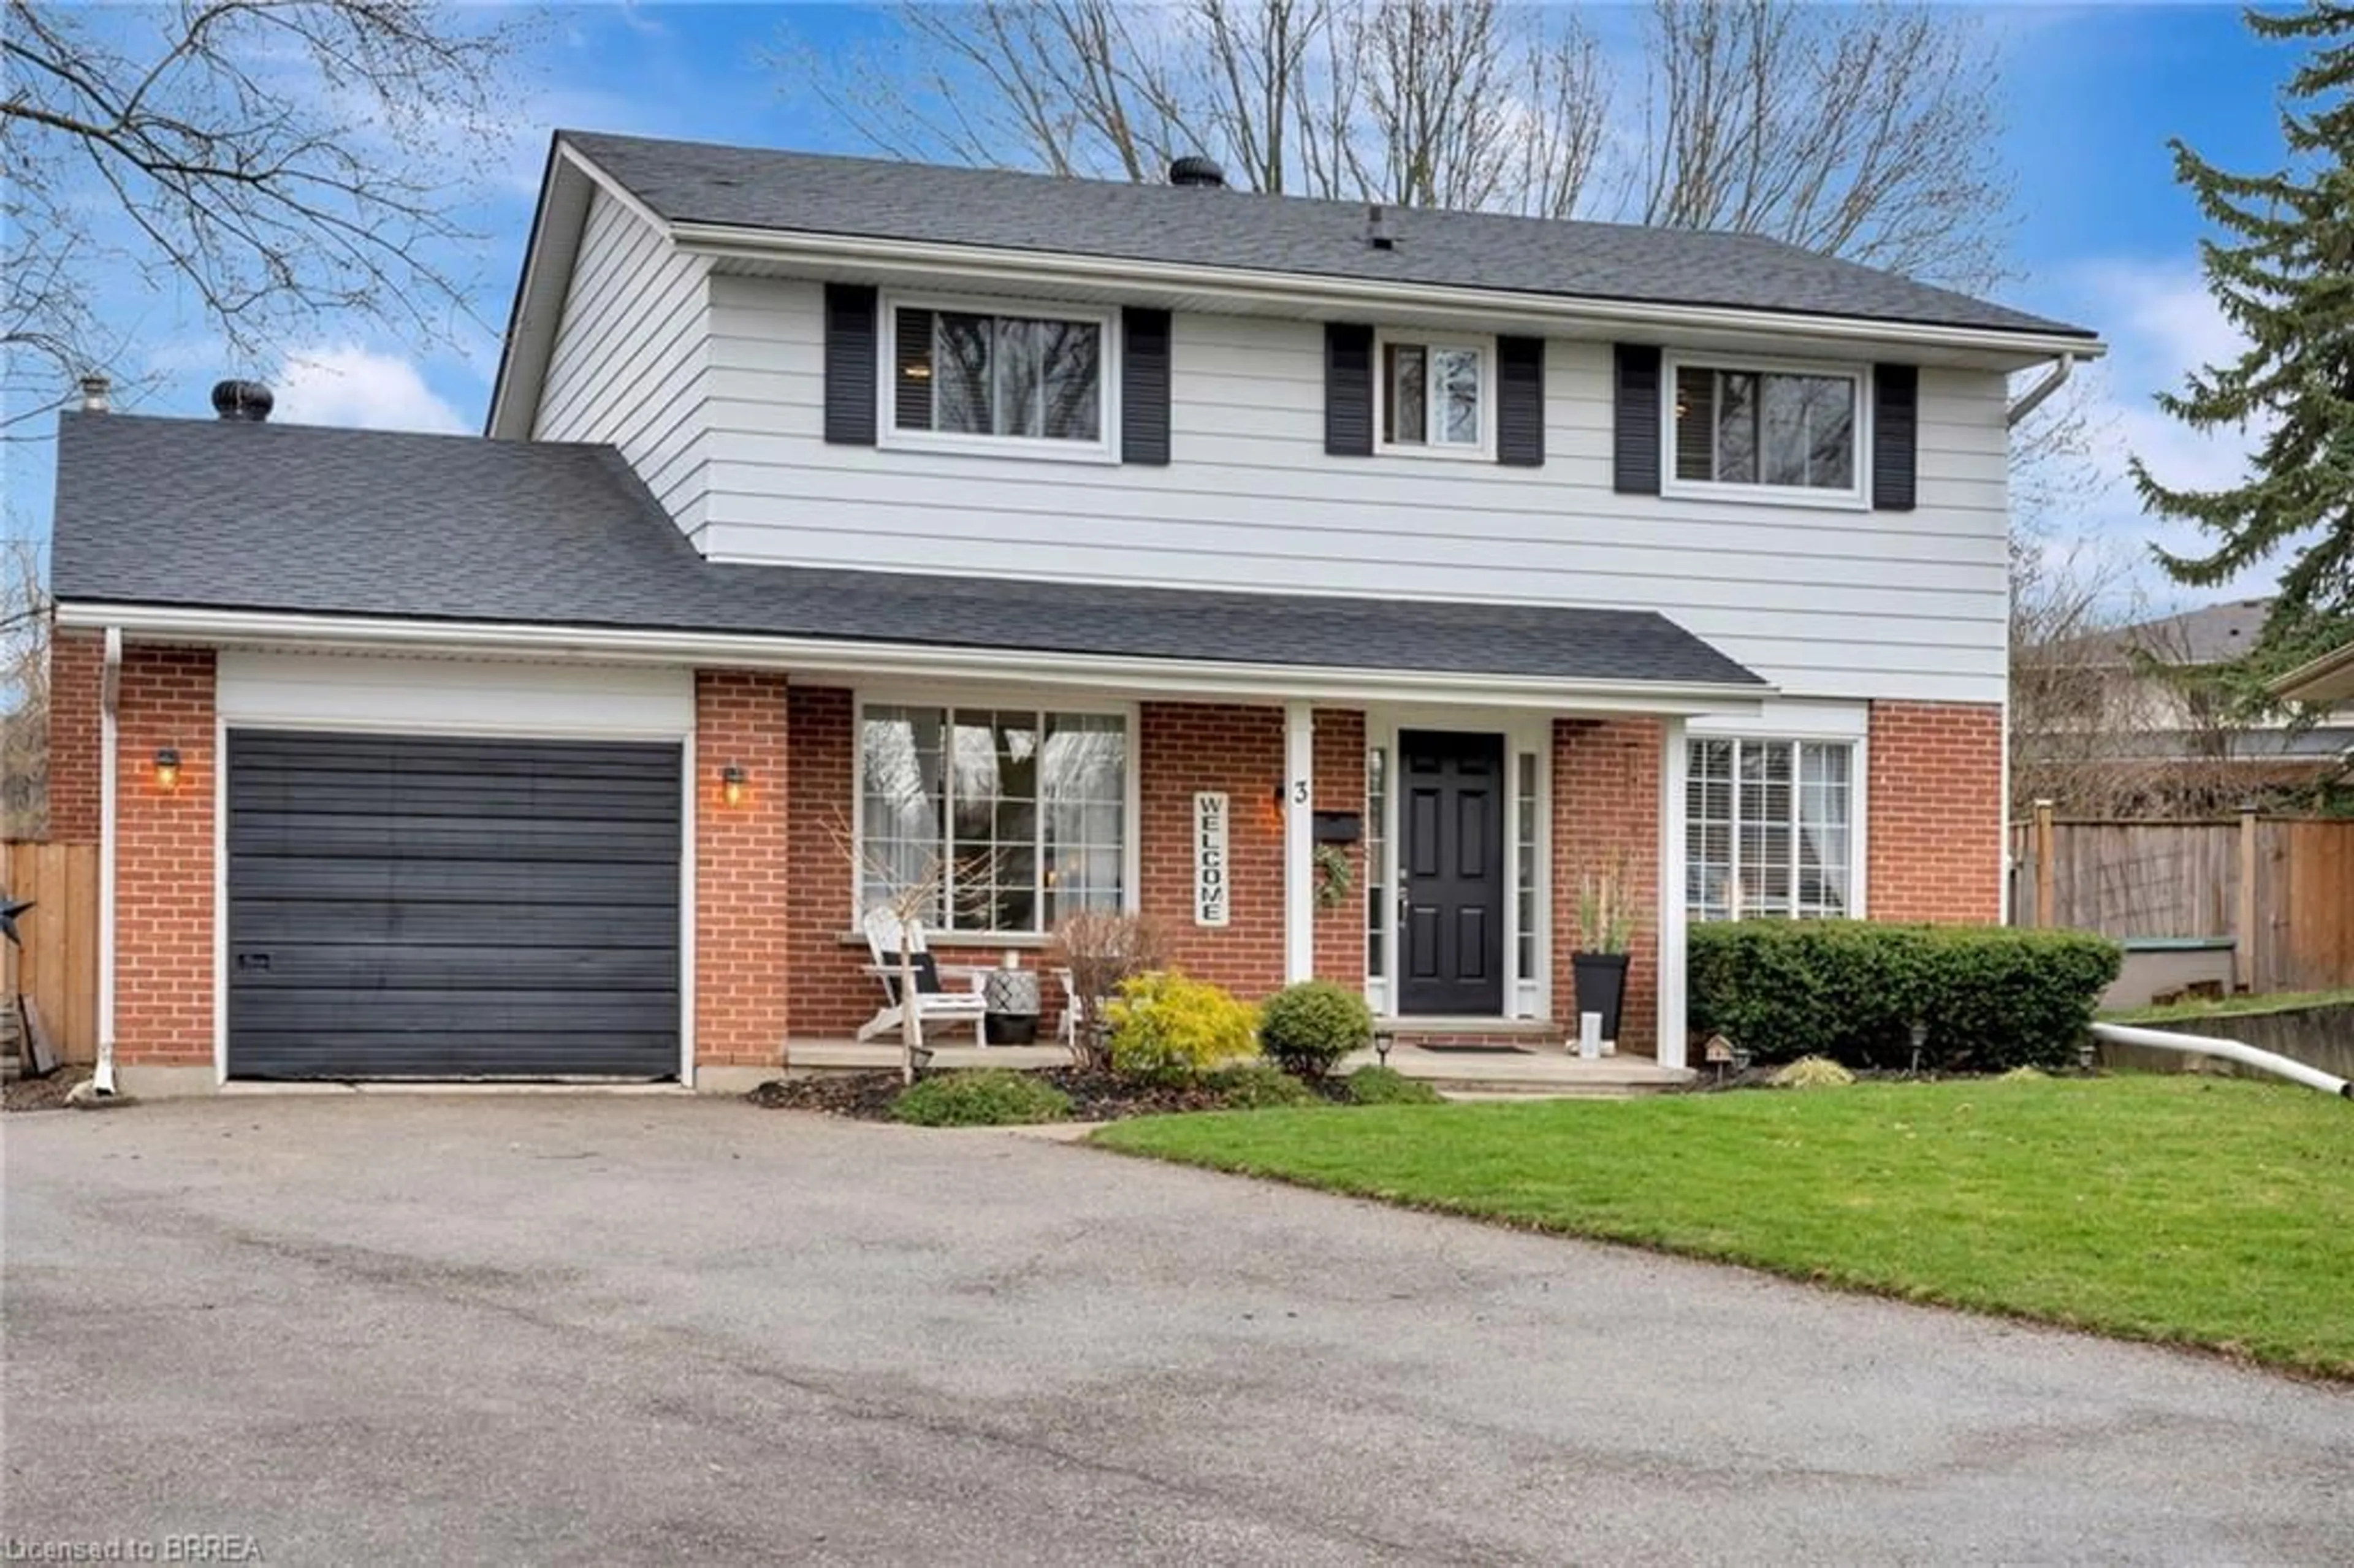 Home with brick exterior material for 3 Ashgrove Crt, Brantford Ontario N3R 6H9